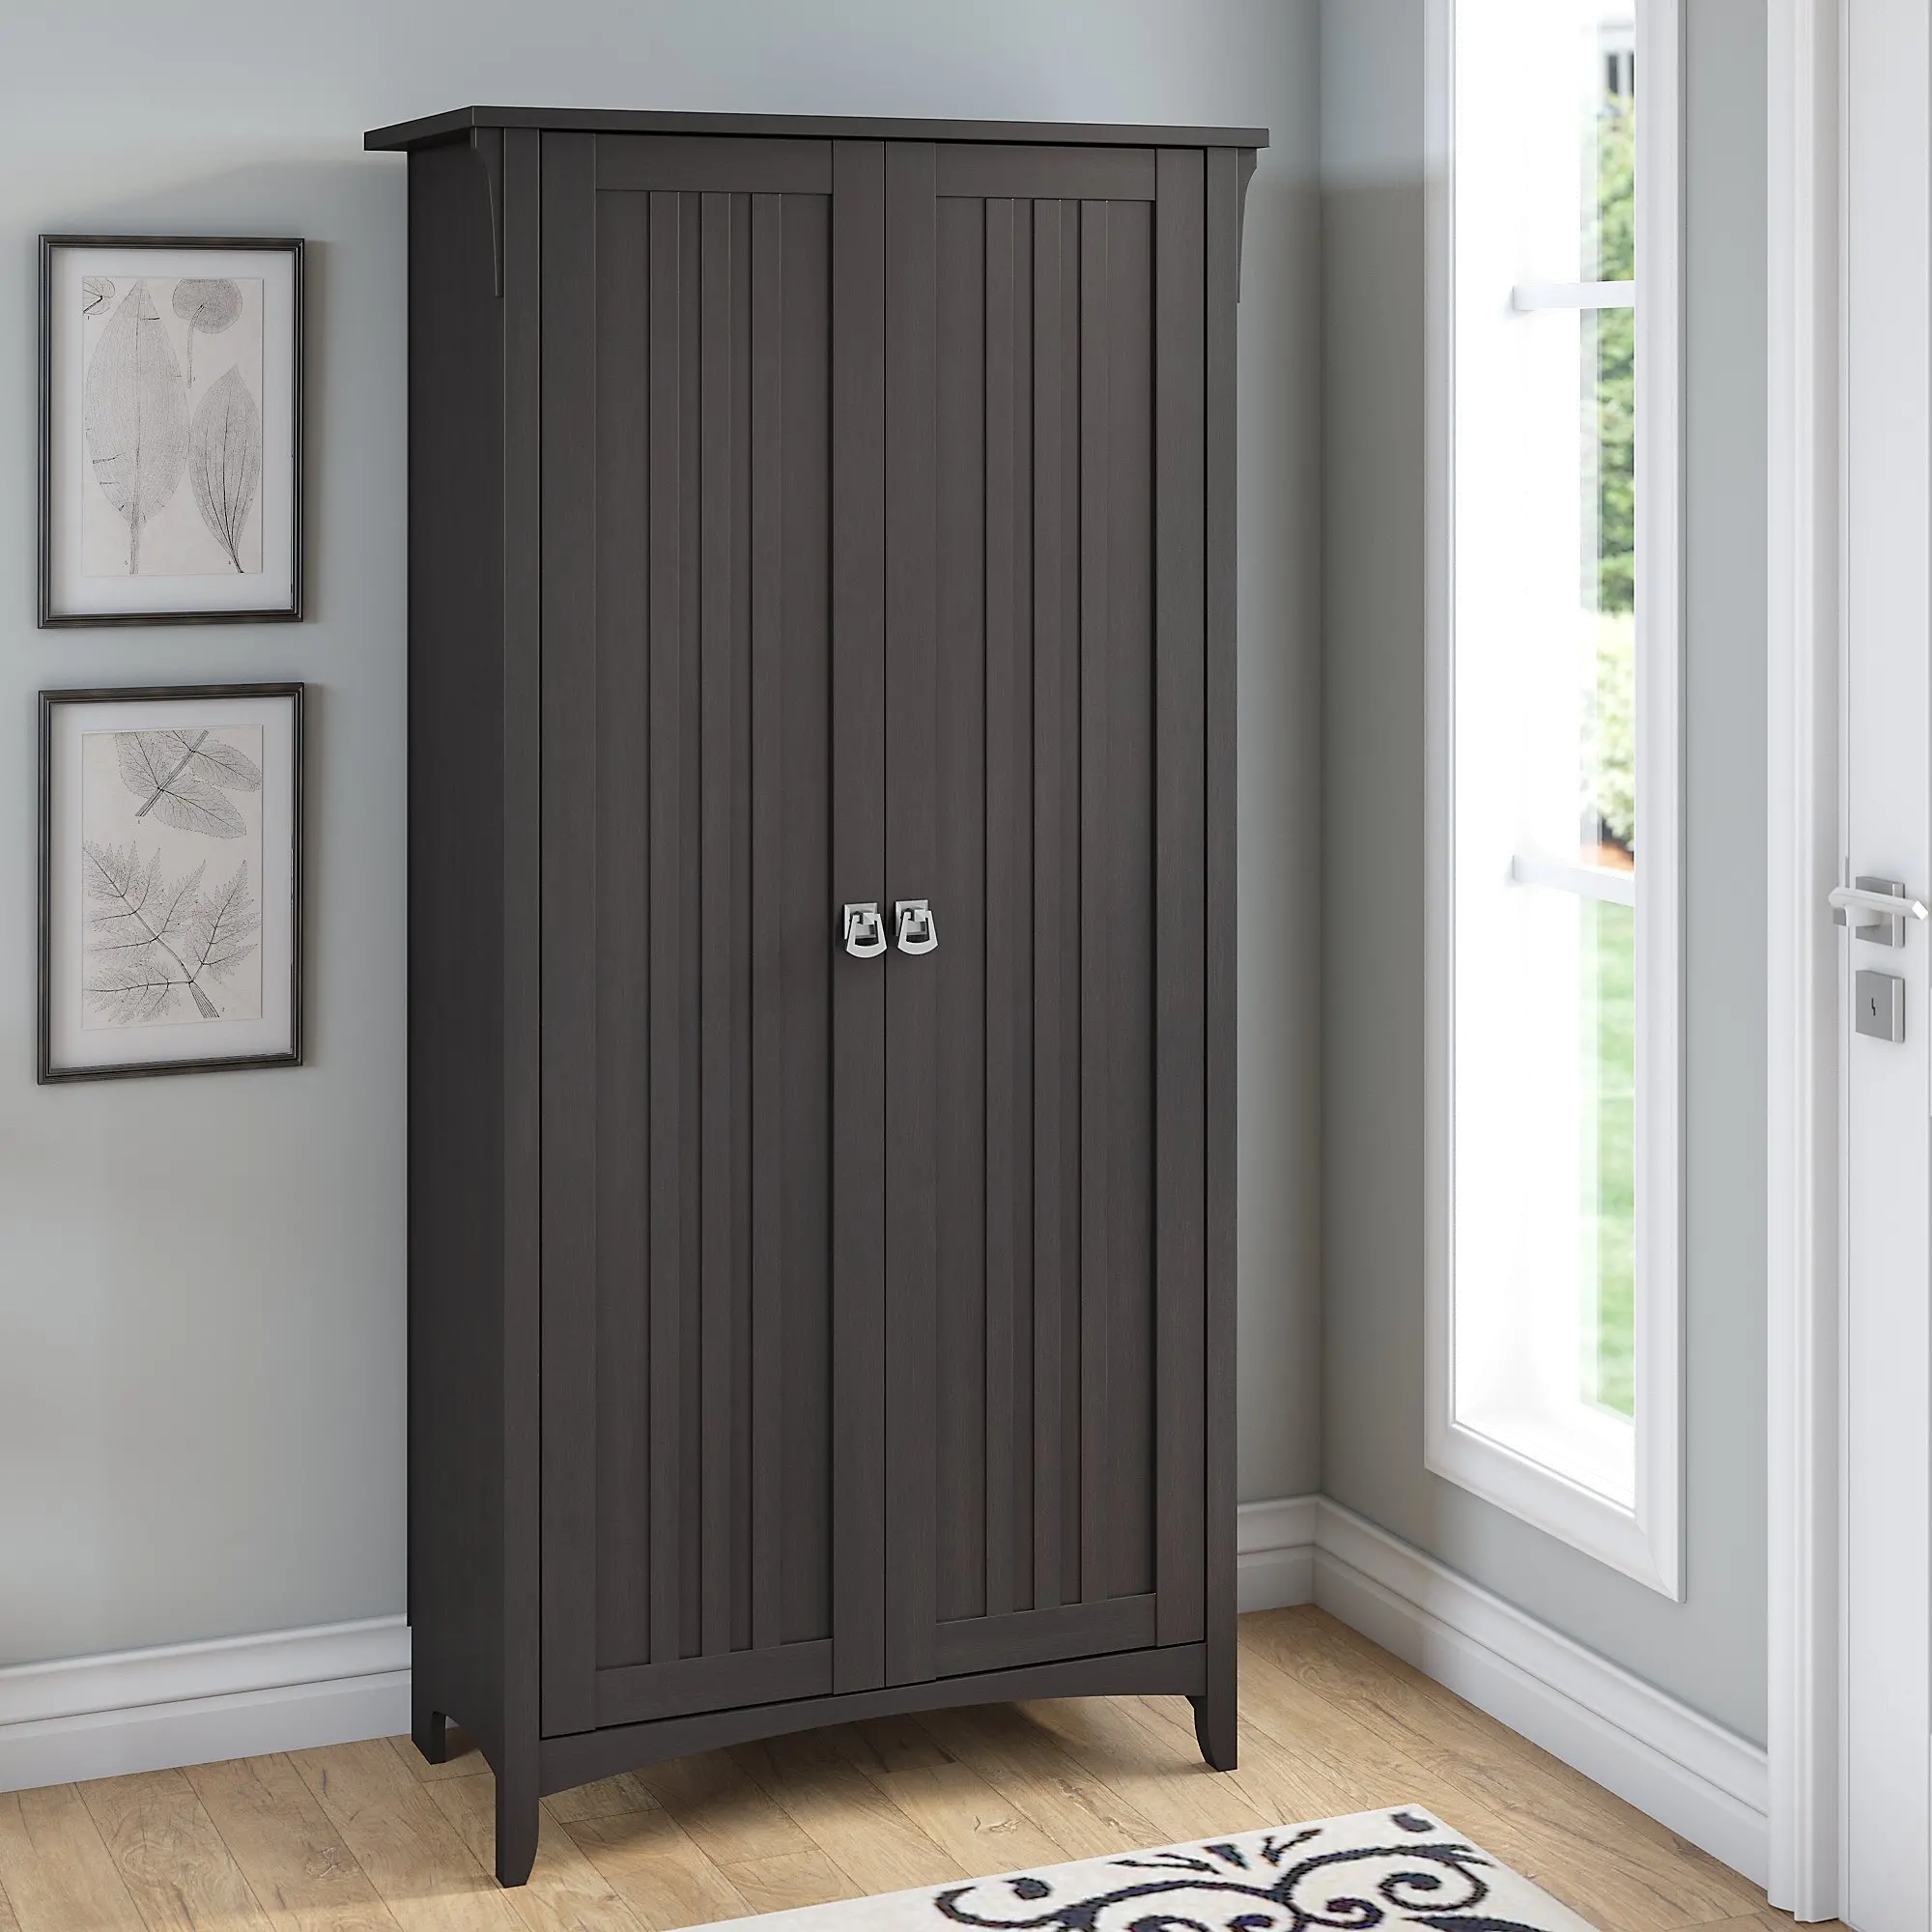 https://static.rcwilley.com/products/111718953/Salinas-Vintage-Black-Tall-Storage-Cabinet-with-Doors---Bush-Furniture-rcwilley-image1.webp